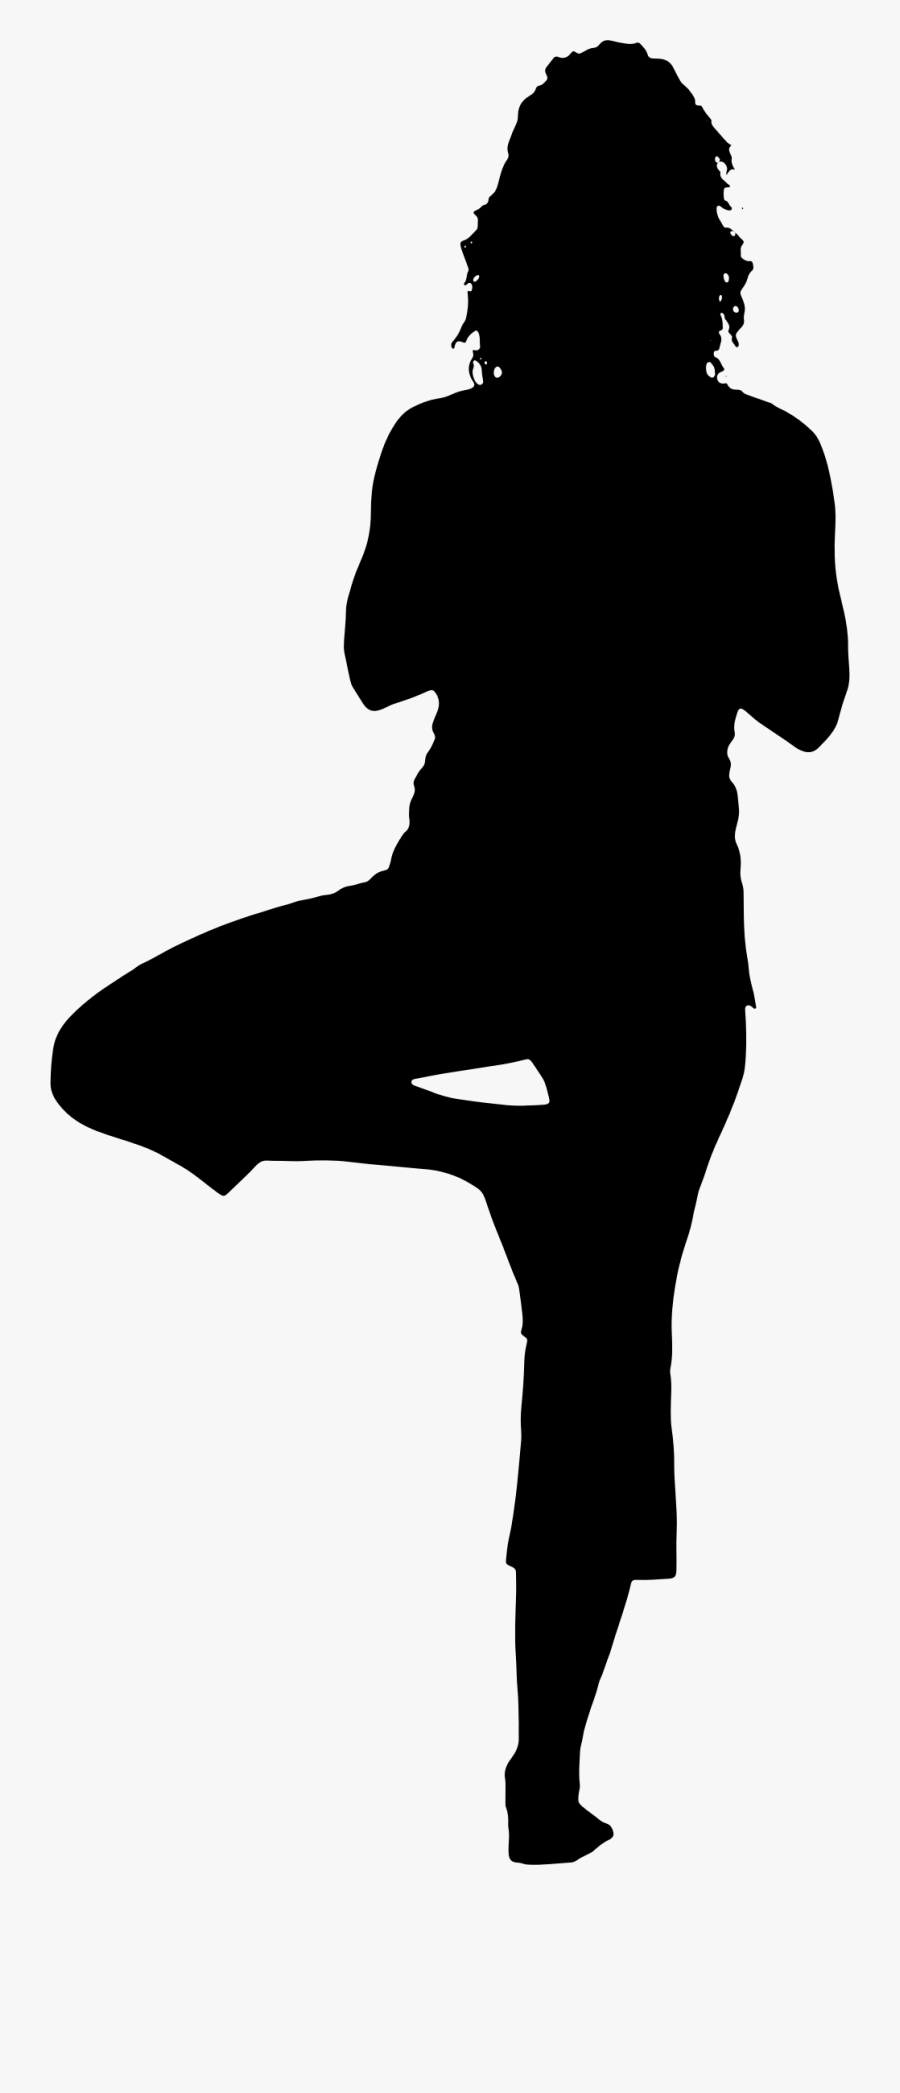 Free Clipart Silhouette At - Silhouette Of Tree Pose, Transparent Clipart